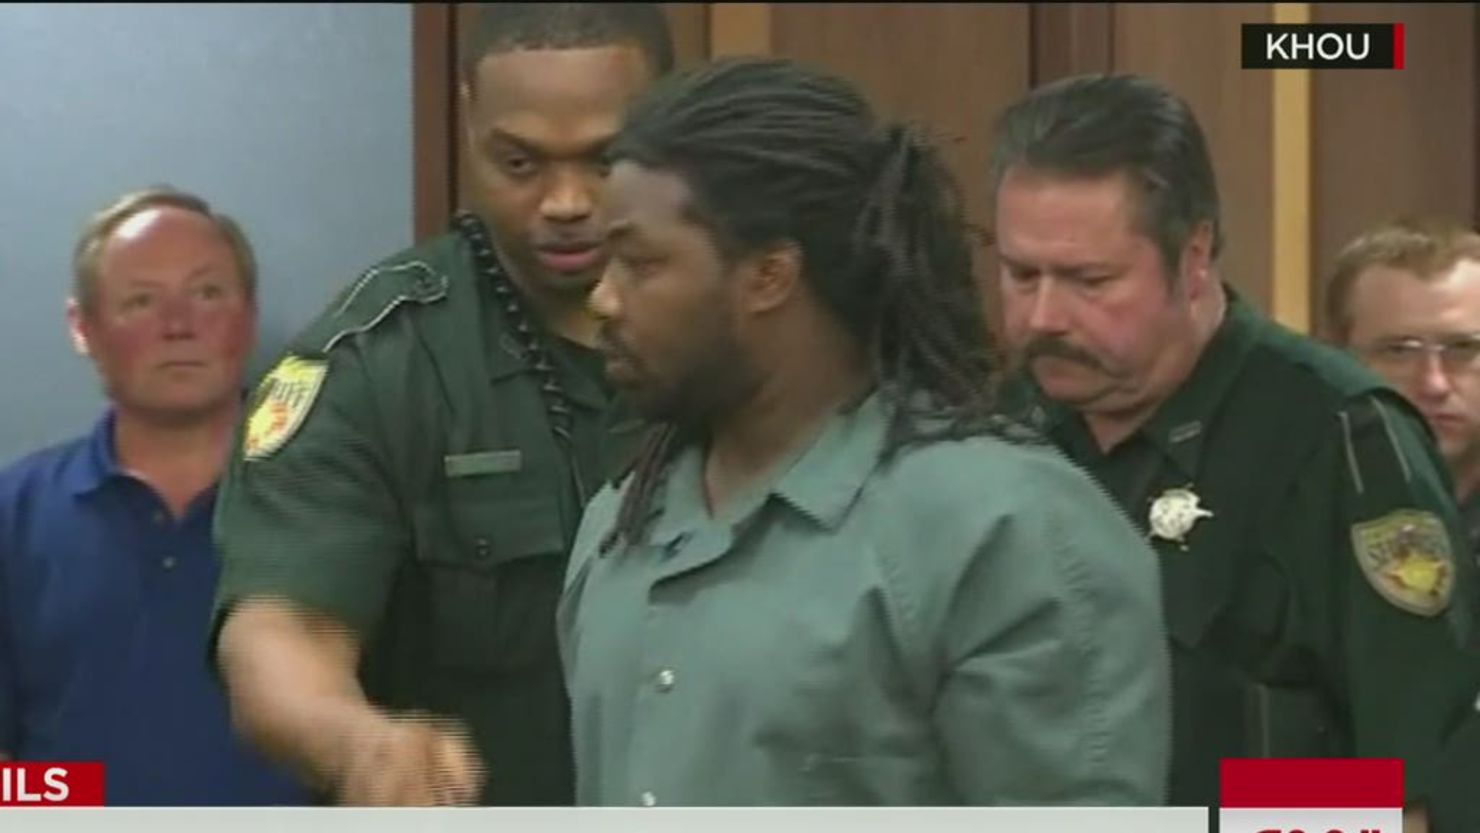 Police are investigating Jesse Matthew and possible links to a string of unsolved killings and disappearances.